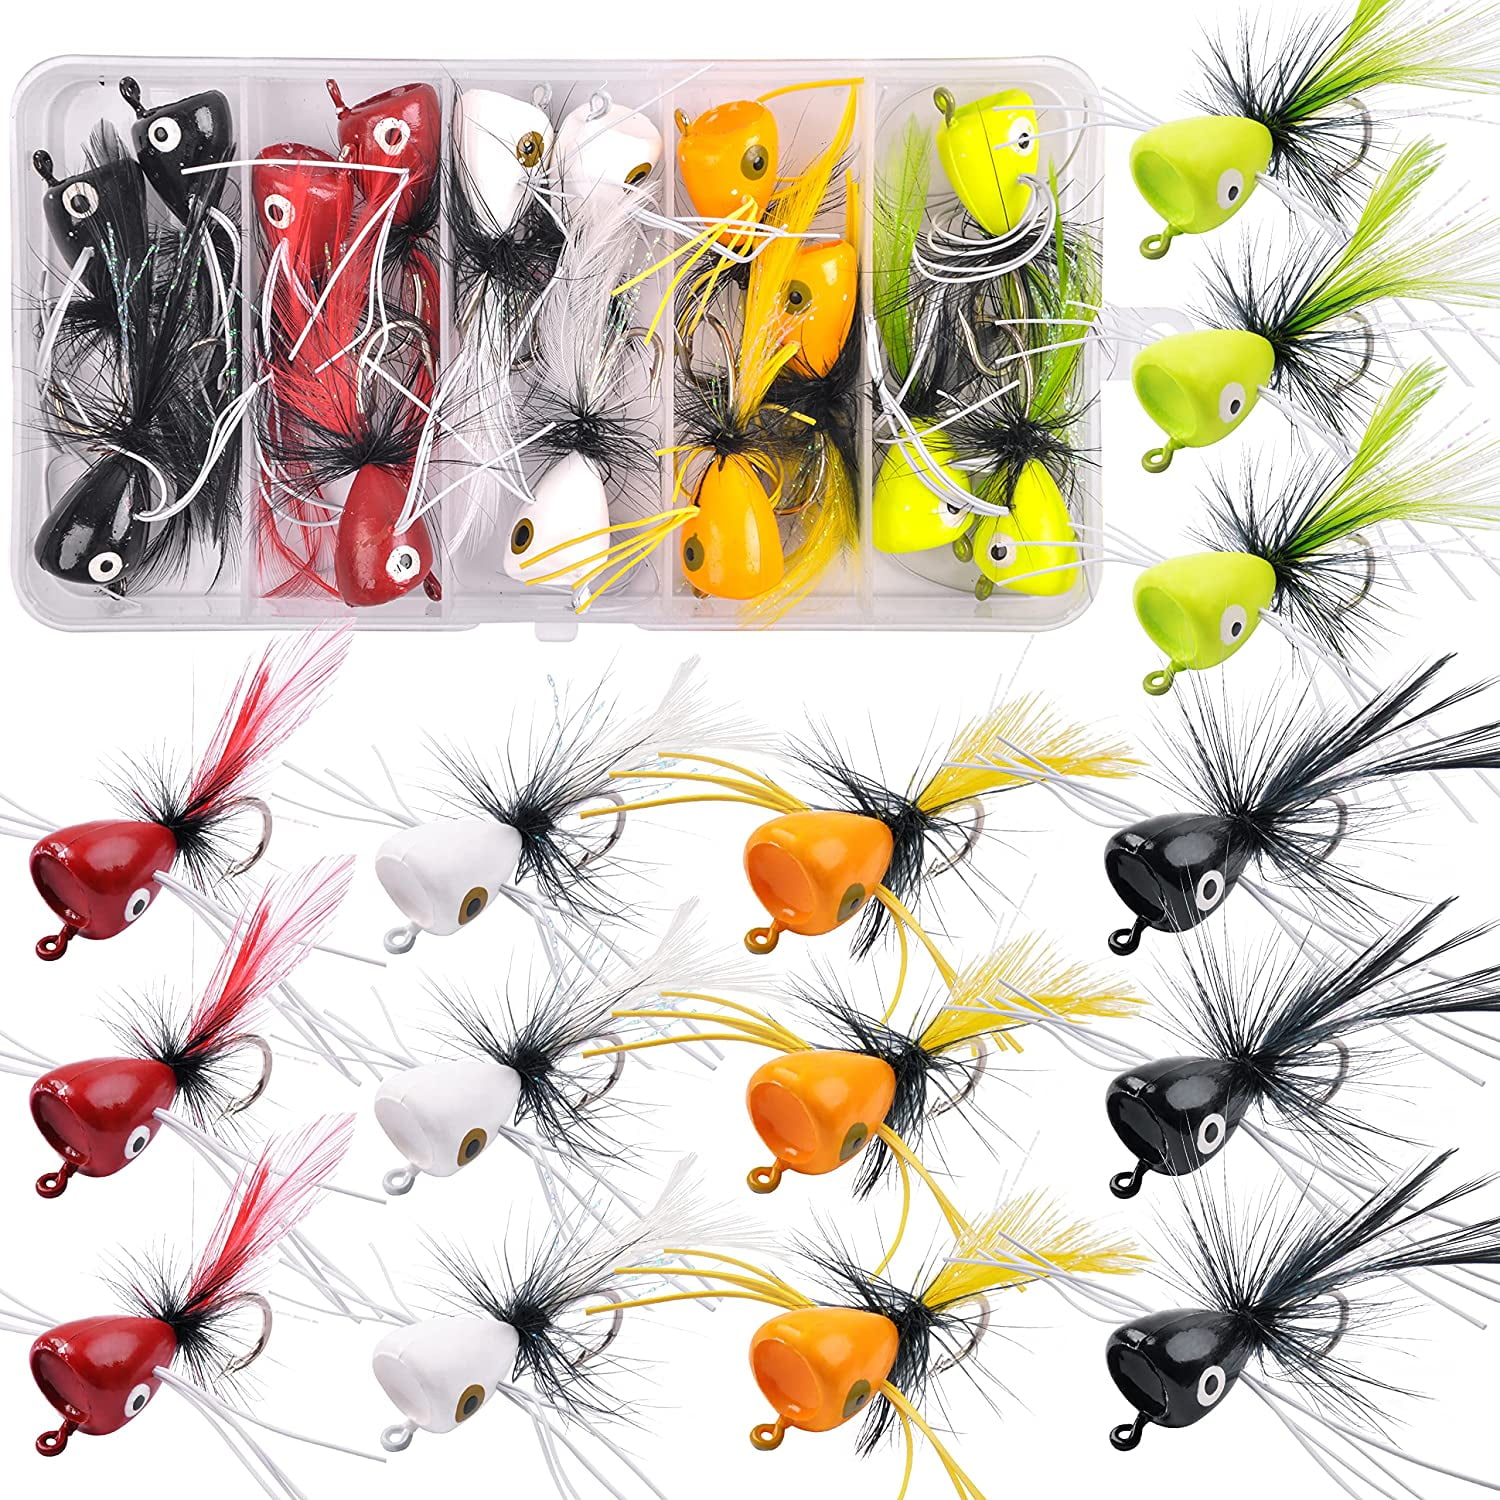 Dry Fly Fishing Popper Lure Kit, 15Pcs Fly Bug Lures Steelhead Flies Bass  Bug Poppers Flies Trout Fly Fishing Flies Lure Assortment 